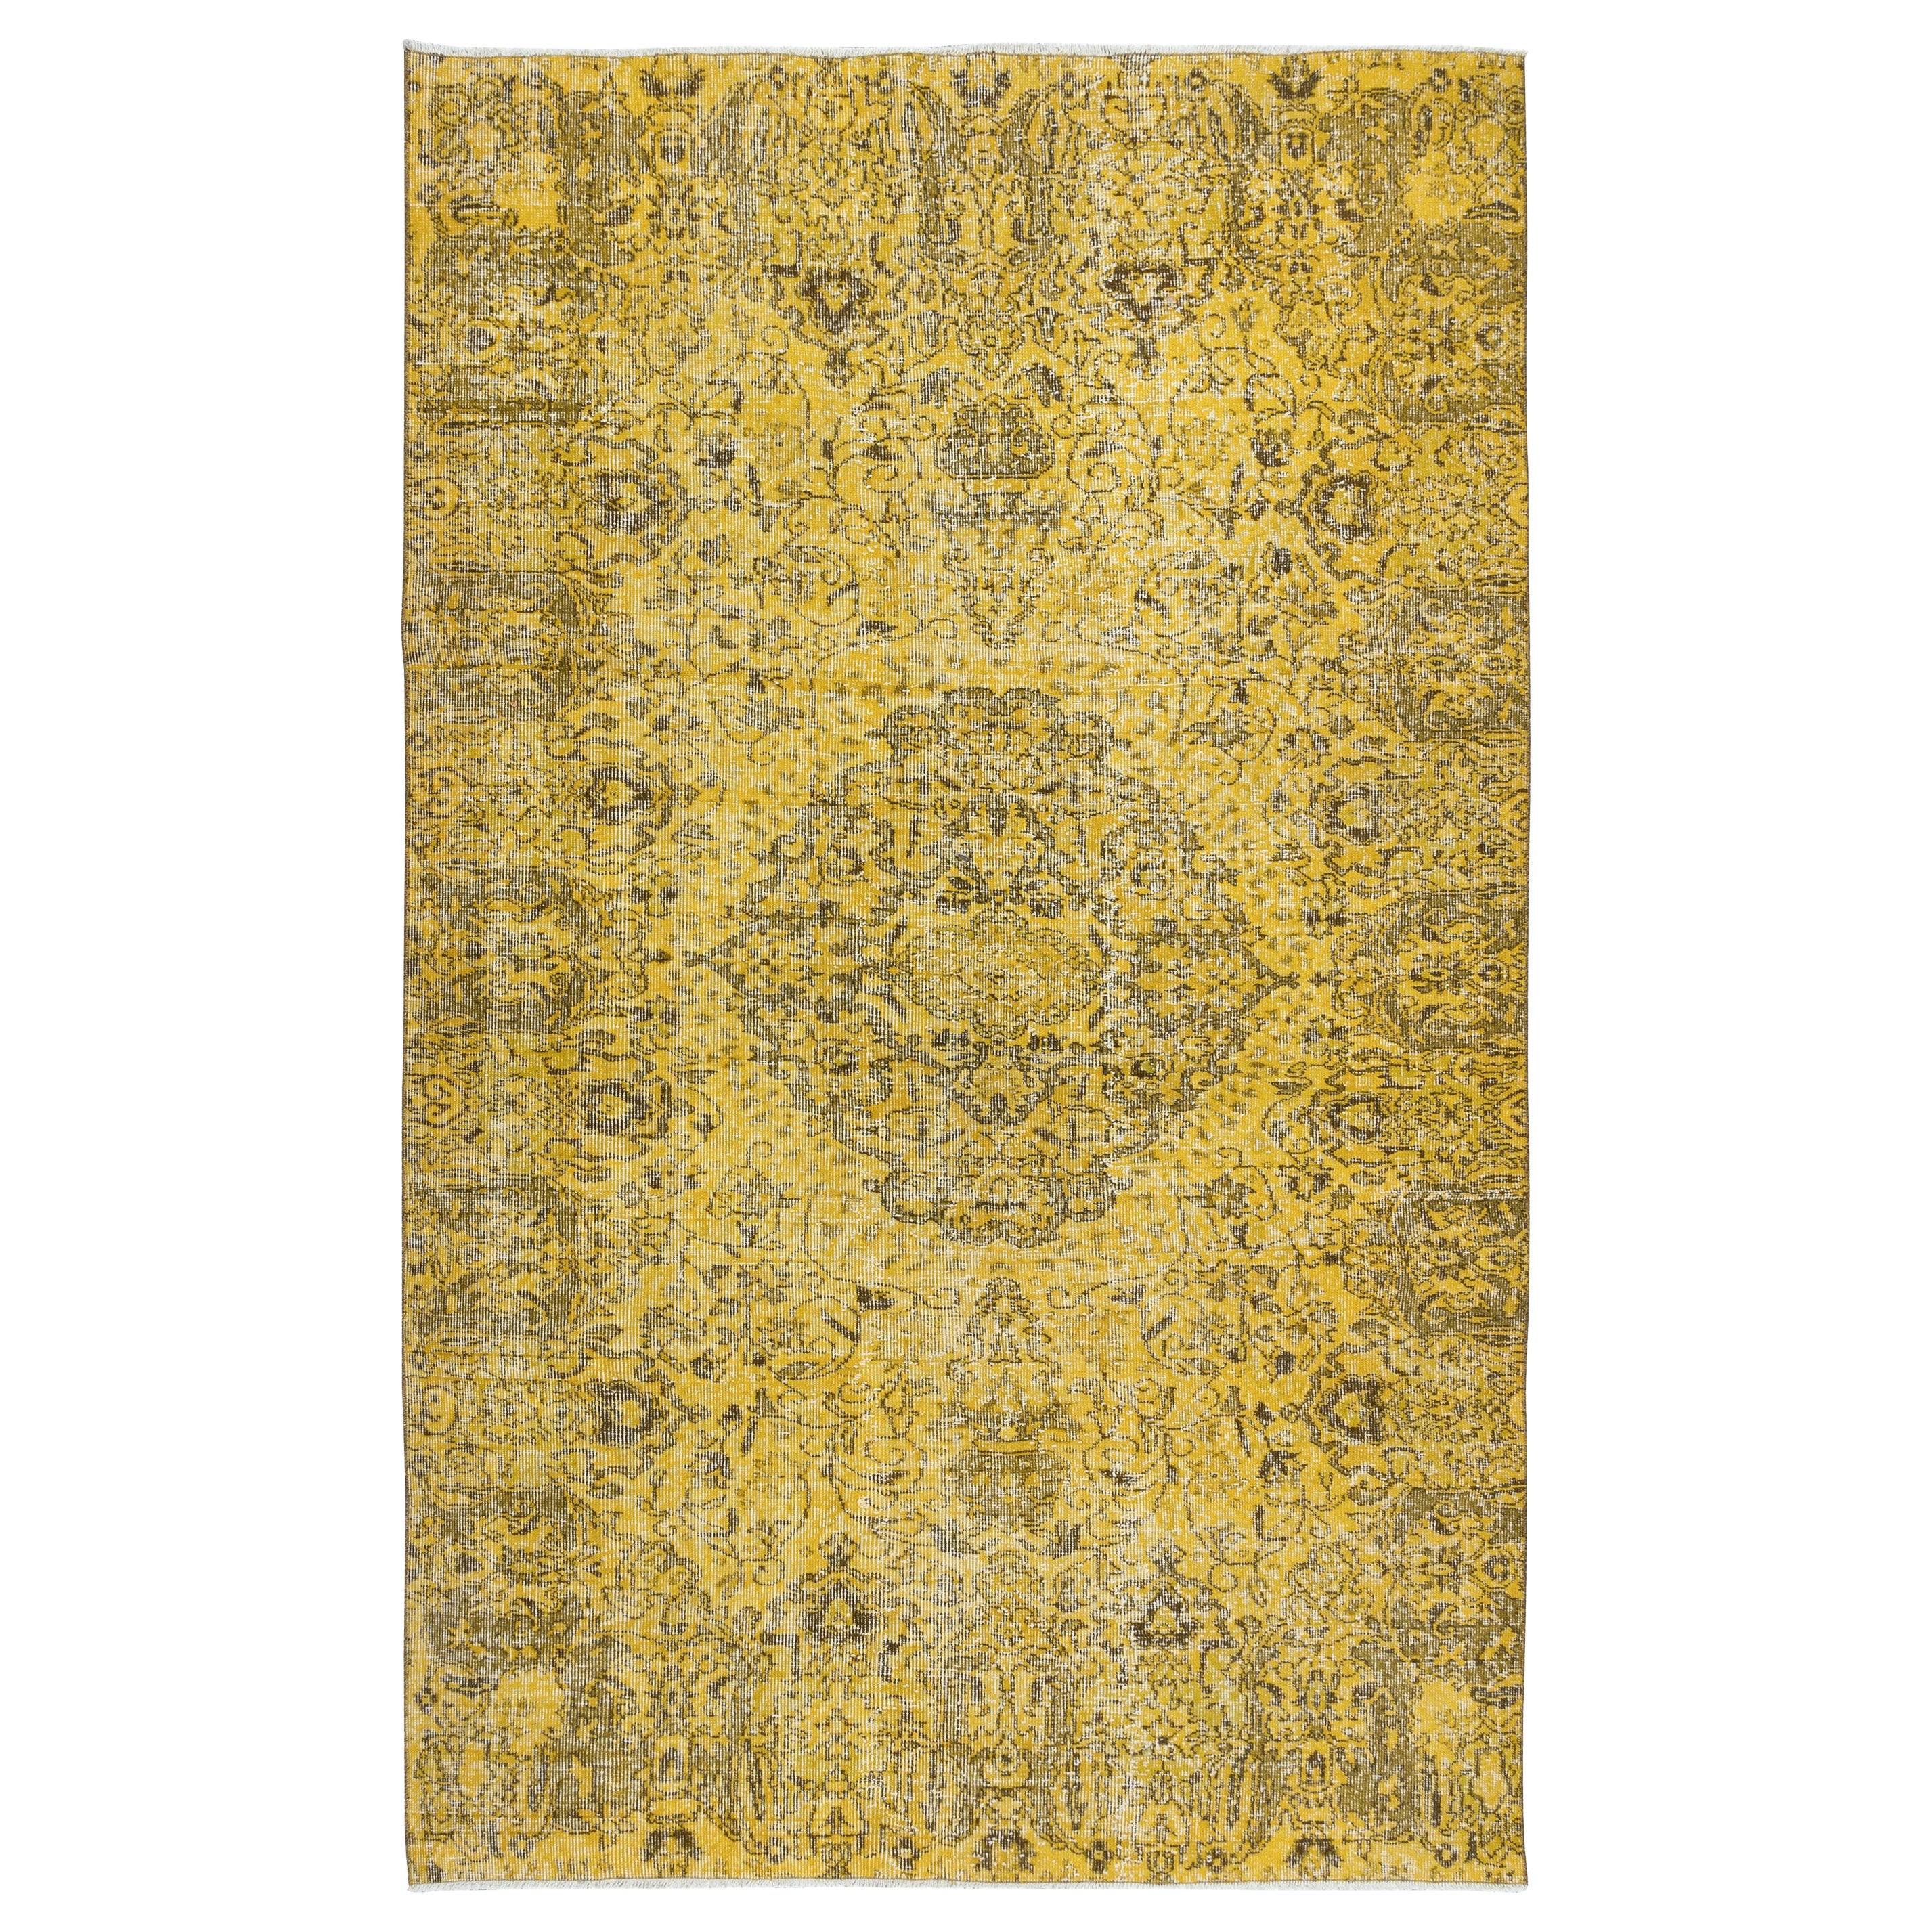 5.4x8.6 Ft Decorative Handmade Turkish Area Rug in Yellow with Medallion Design